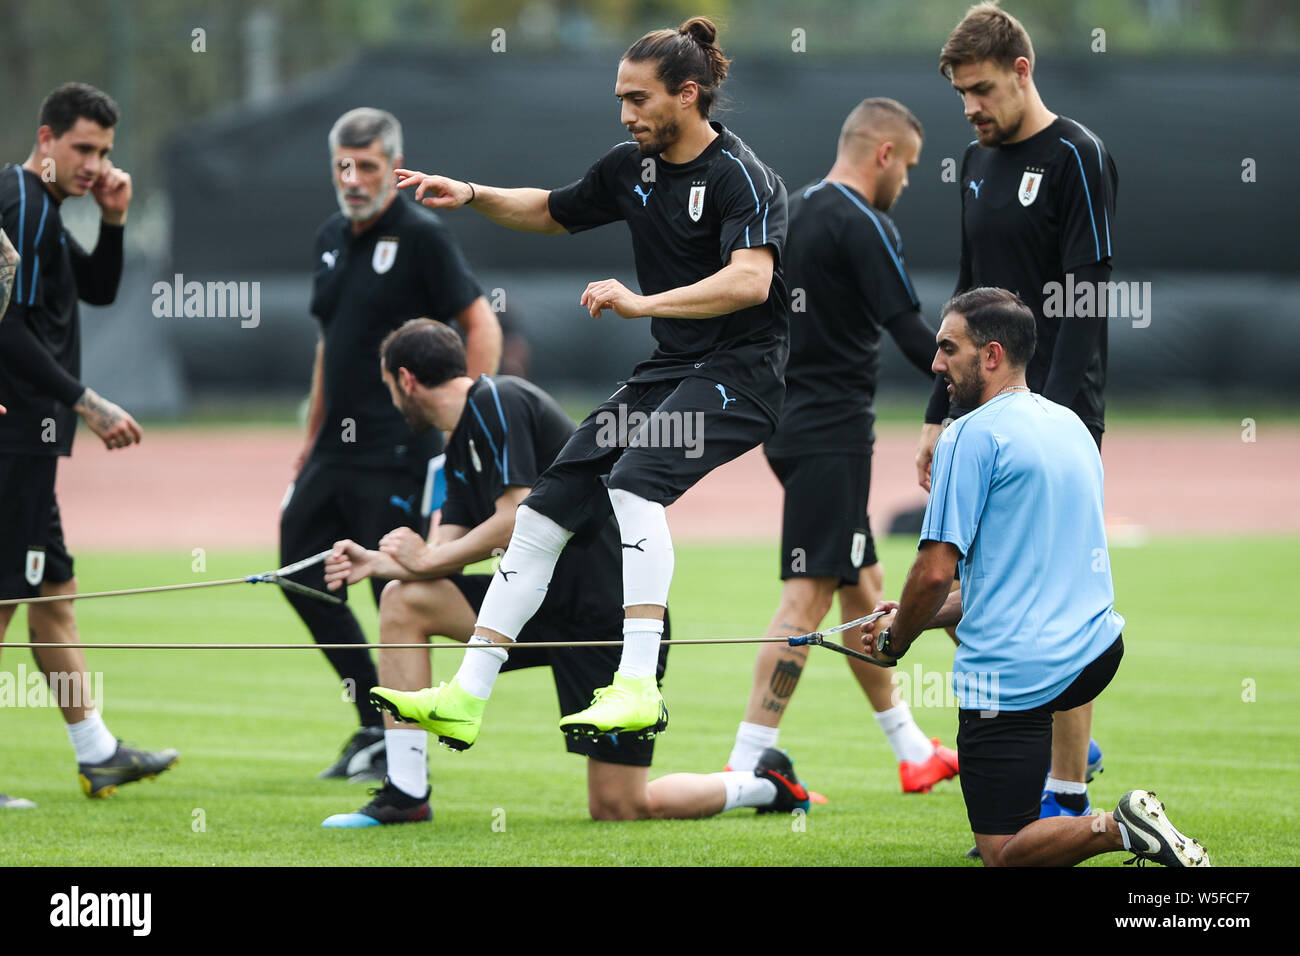 Martin Caceres and other players of Uruguay national football team take part in a training session for 2019 Gree China Cup International Football Cham Stock Photo